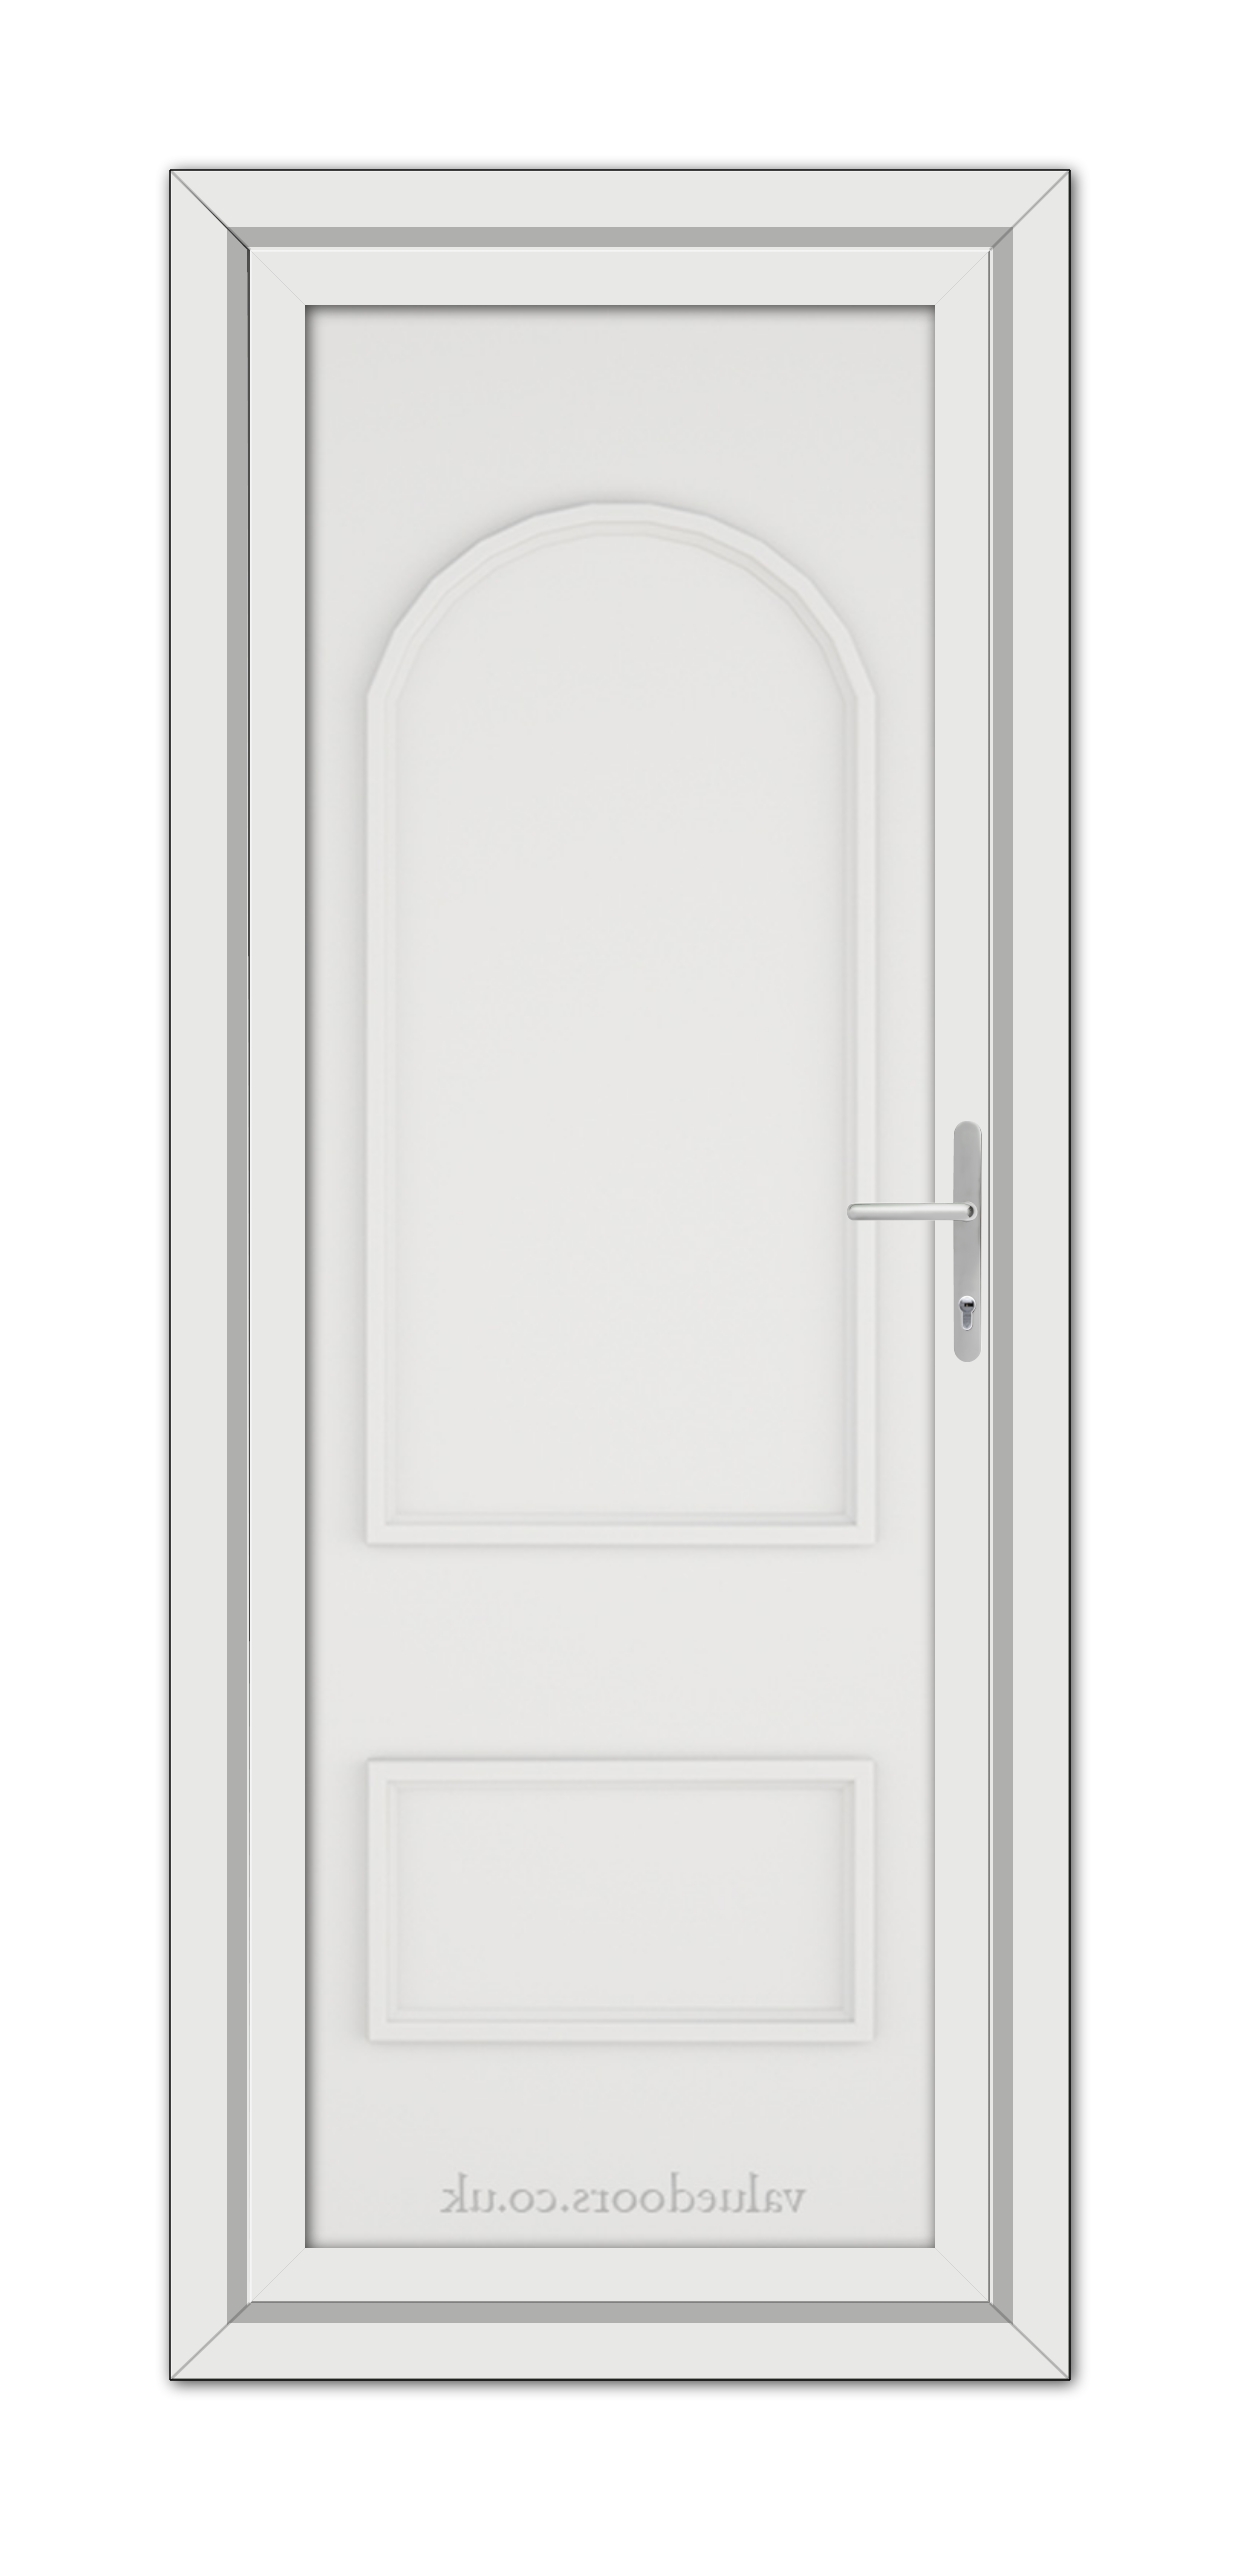 A vertical image of a closed White Rockingham Solid uPVC Door with a simple design and an arched top, featuring a silver handle on the right.